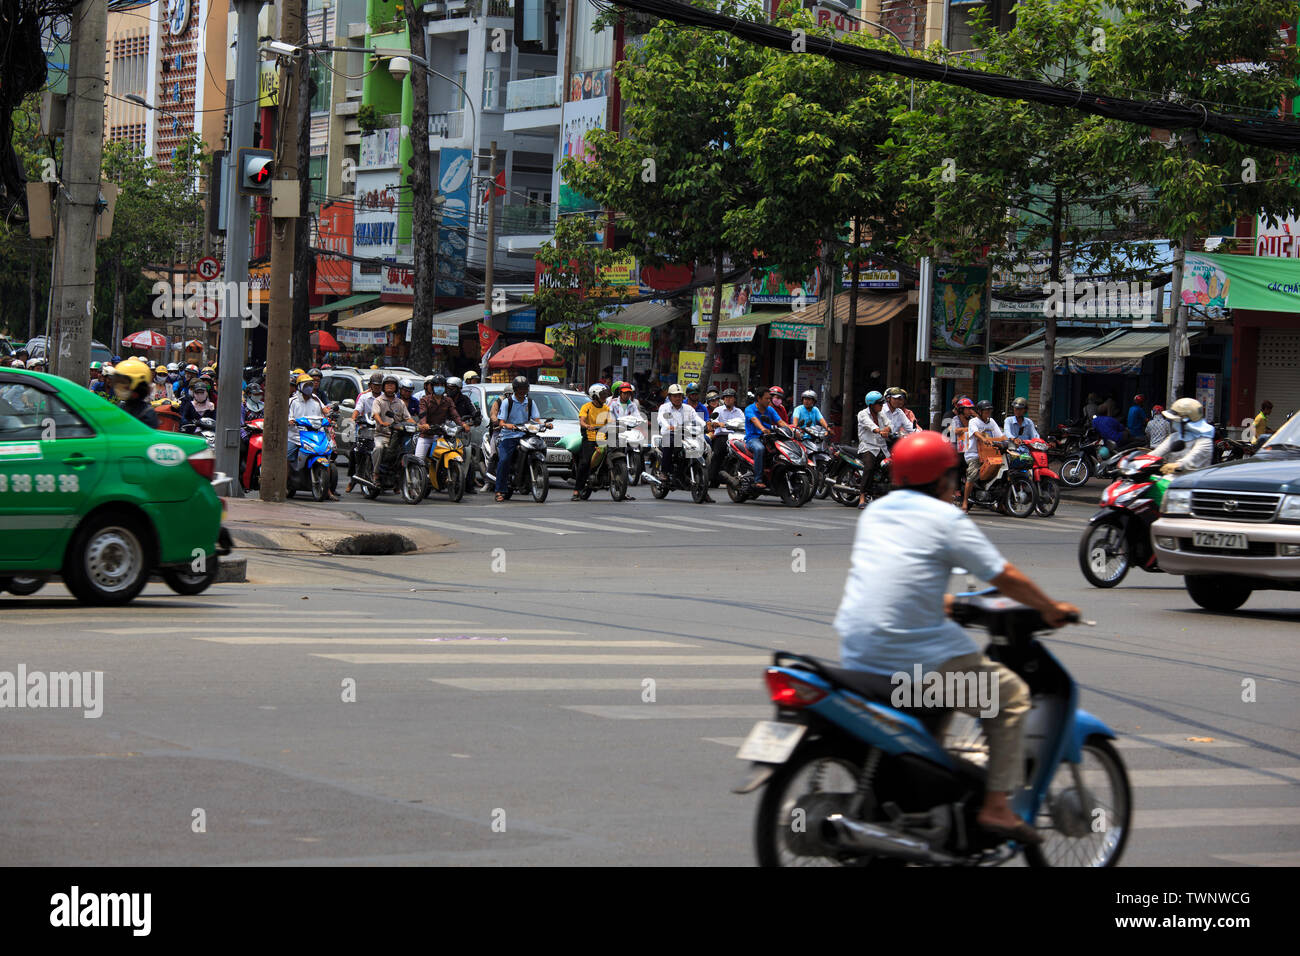 Saigon, Vietnam - April 21, 2014: Chaotic road traffic in Saigon, Vietnam. In the biggest city in Southern Vietnam are more than 4 mil. motorbikes, th Stock Photo